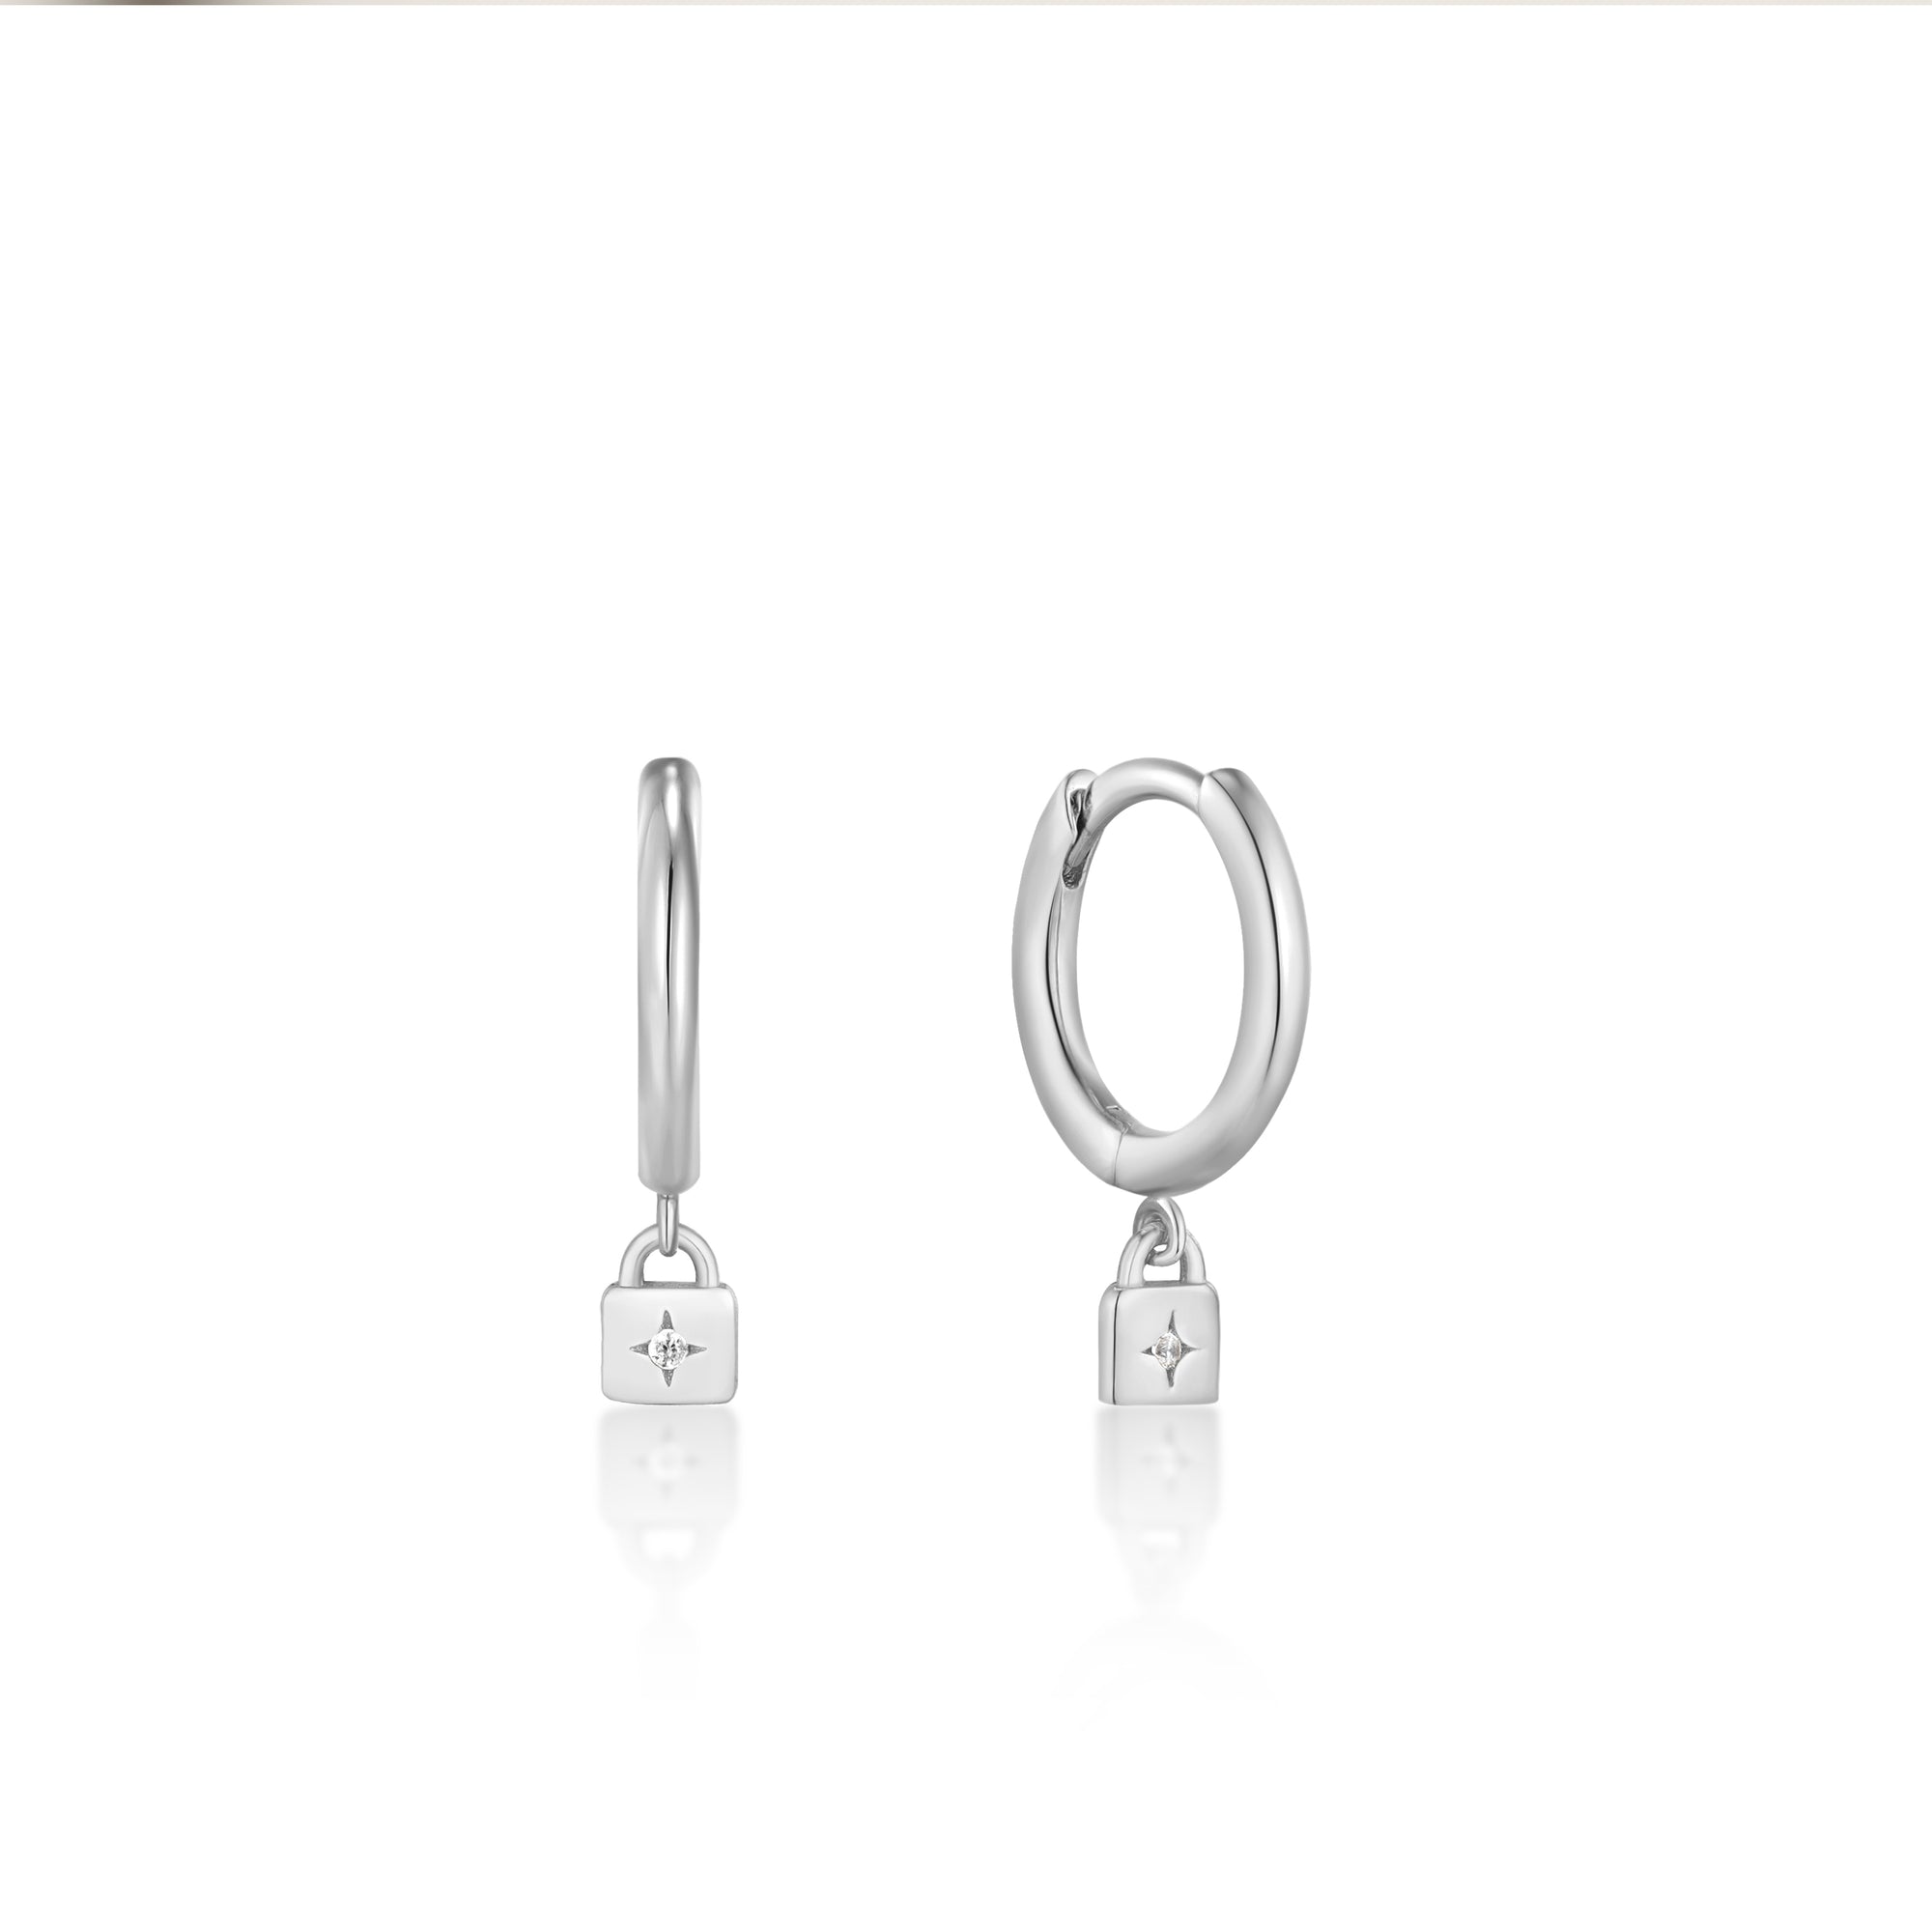 ANIA HAIE ANIA HAIE - Silver Padlock Huggie Hoop Earrings available at The Good Life Boutique